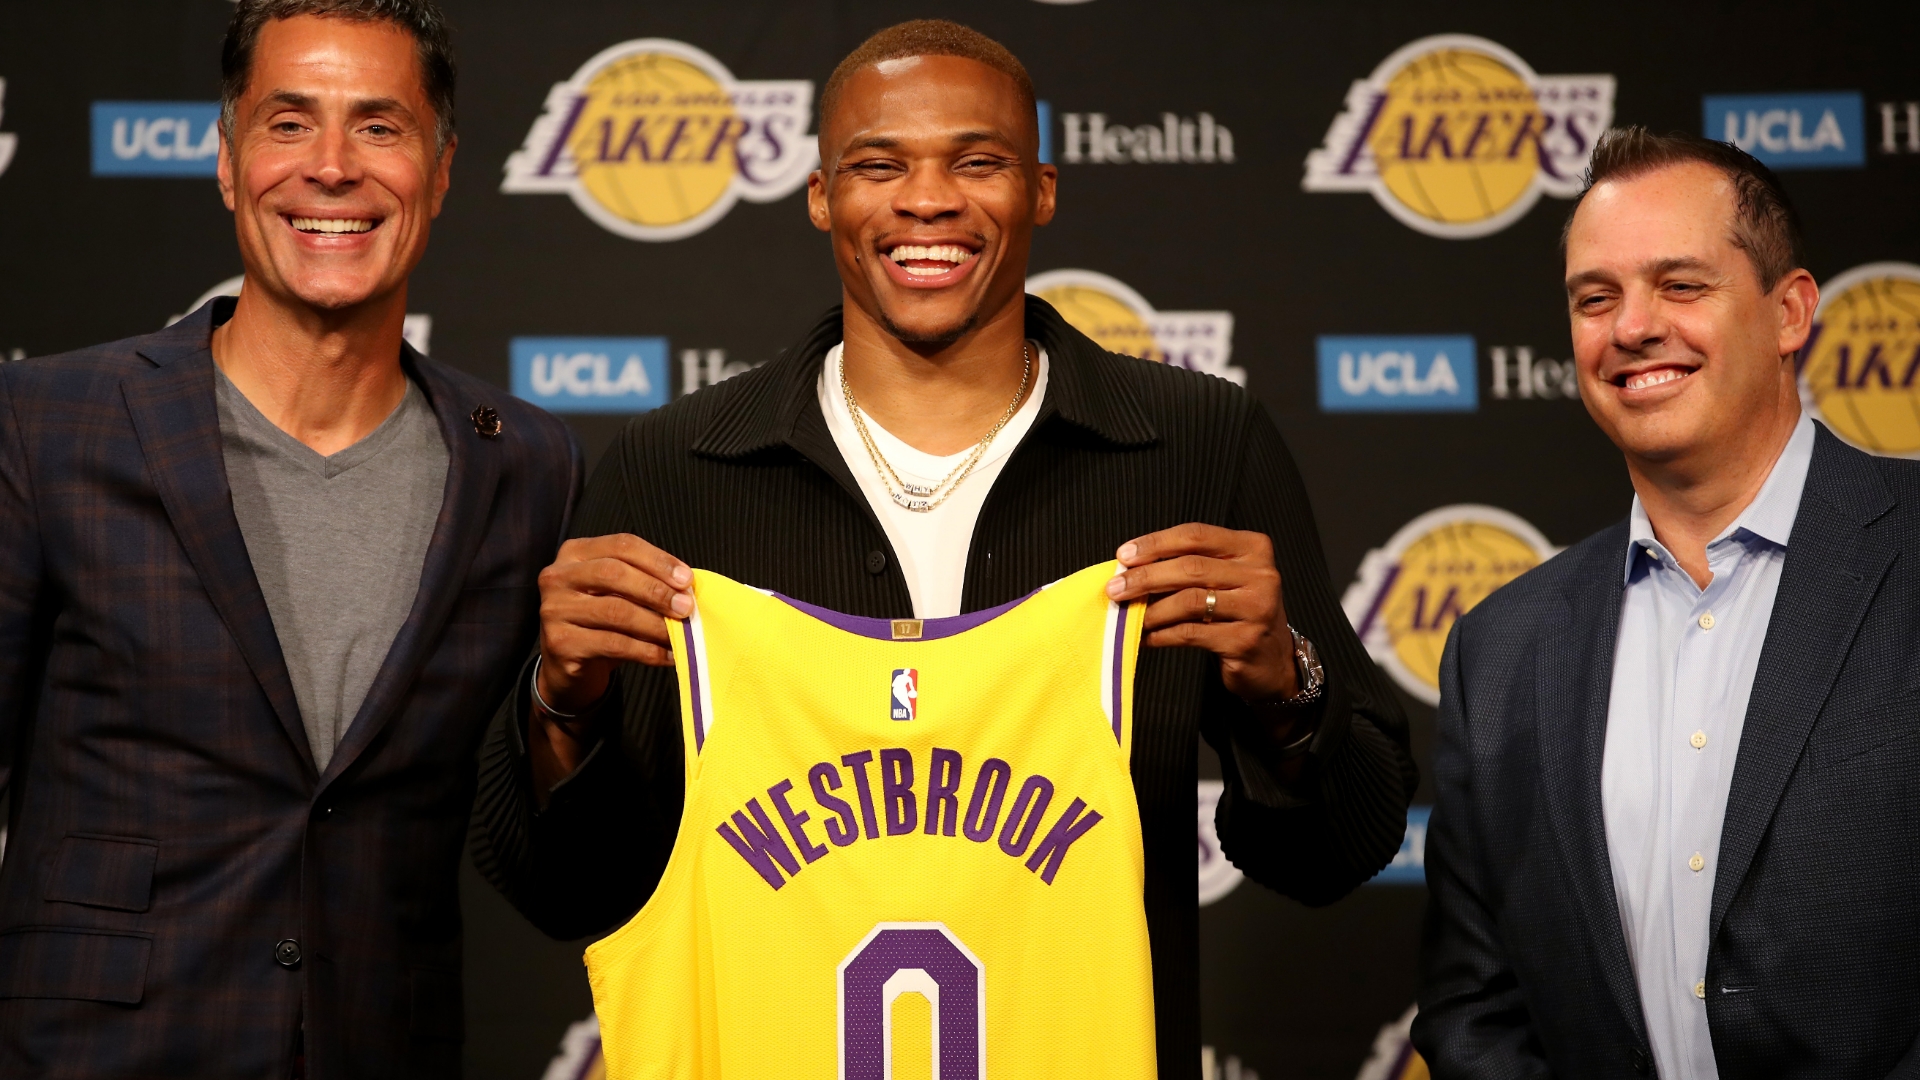 Russell Westbrook: For former MVP, homecoming to Lakers is a 'blessing' on and off the court. NBA.com Australia. The official site of